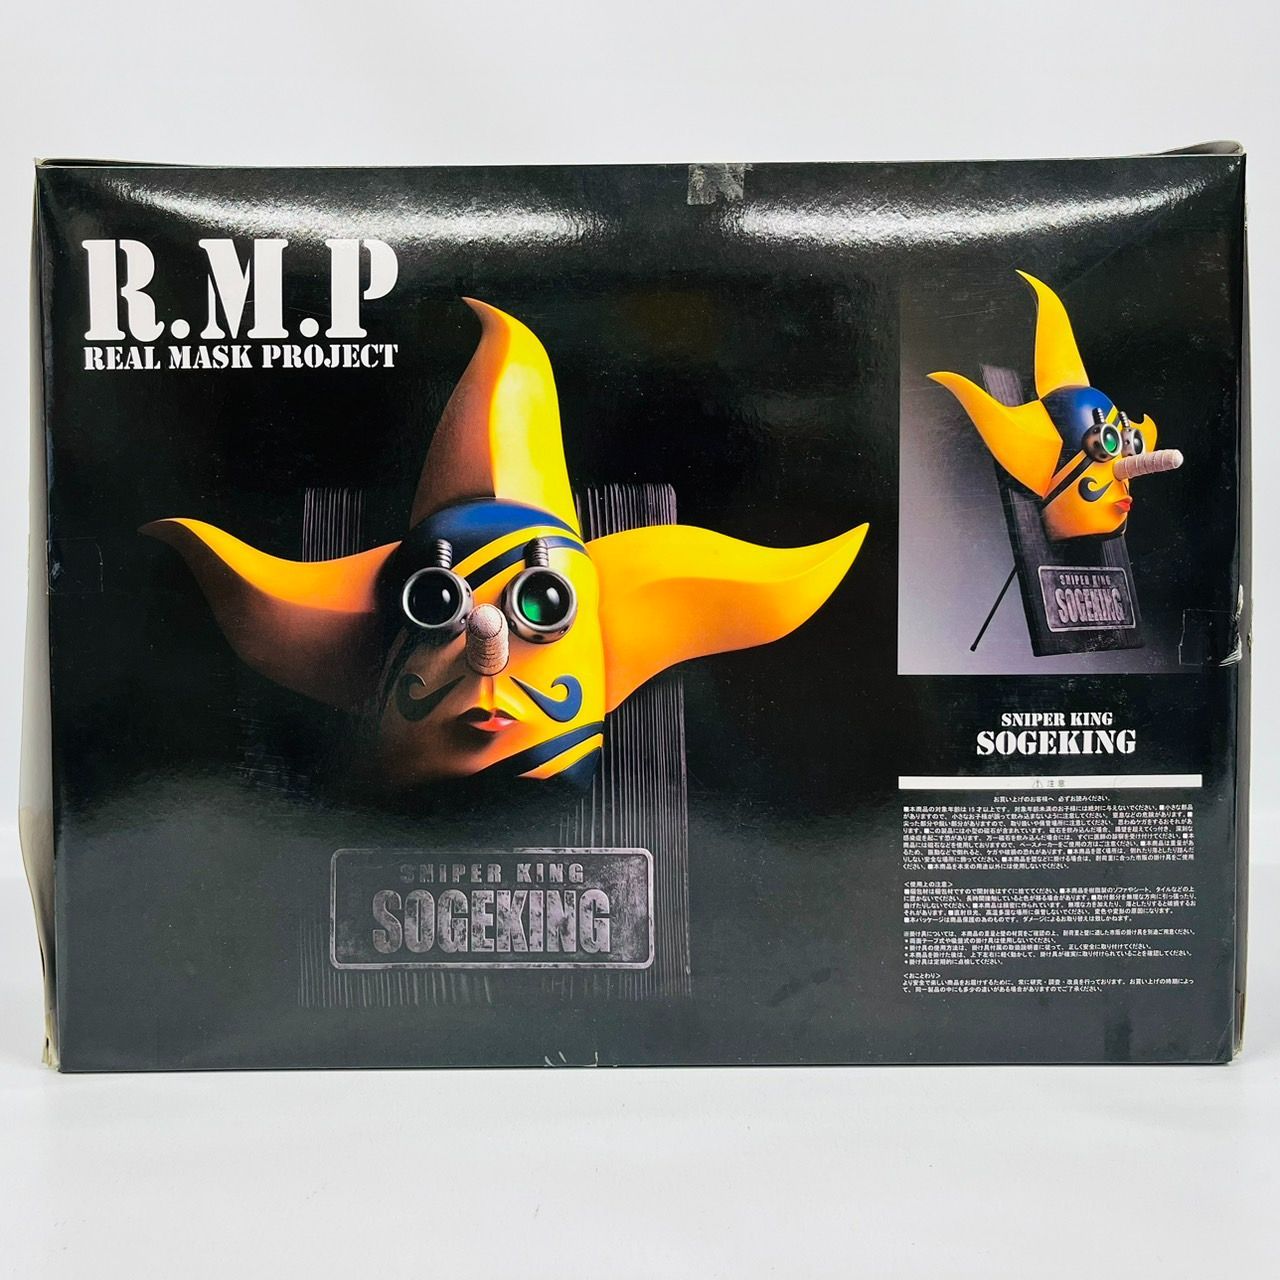 ONE PIECE R.M.P REAL MASK PROJECT そげキングリアルマスク 